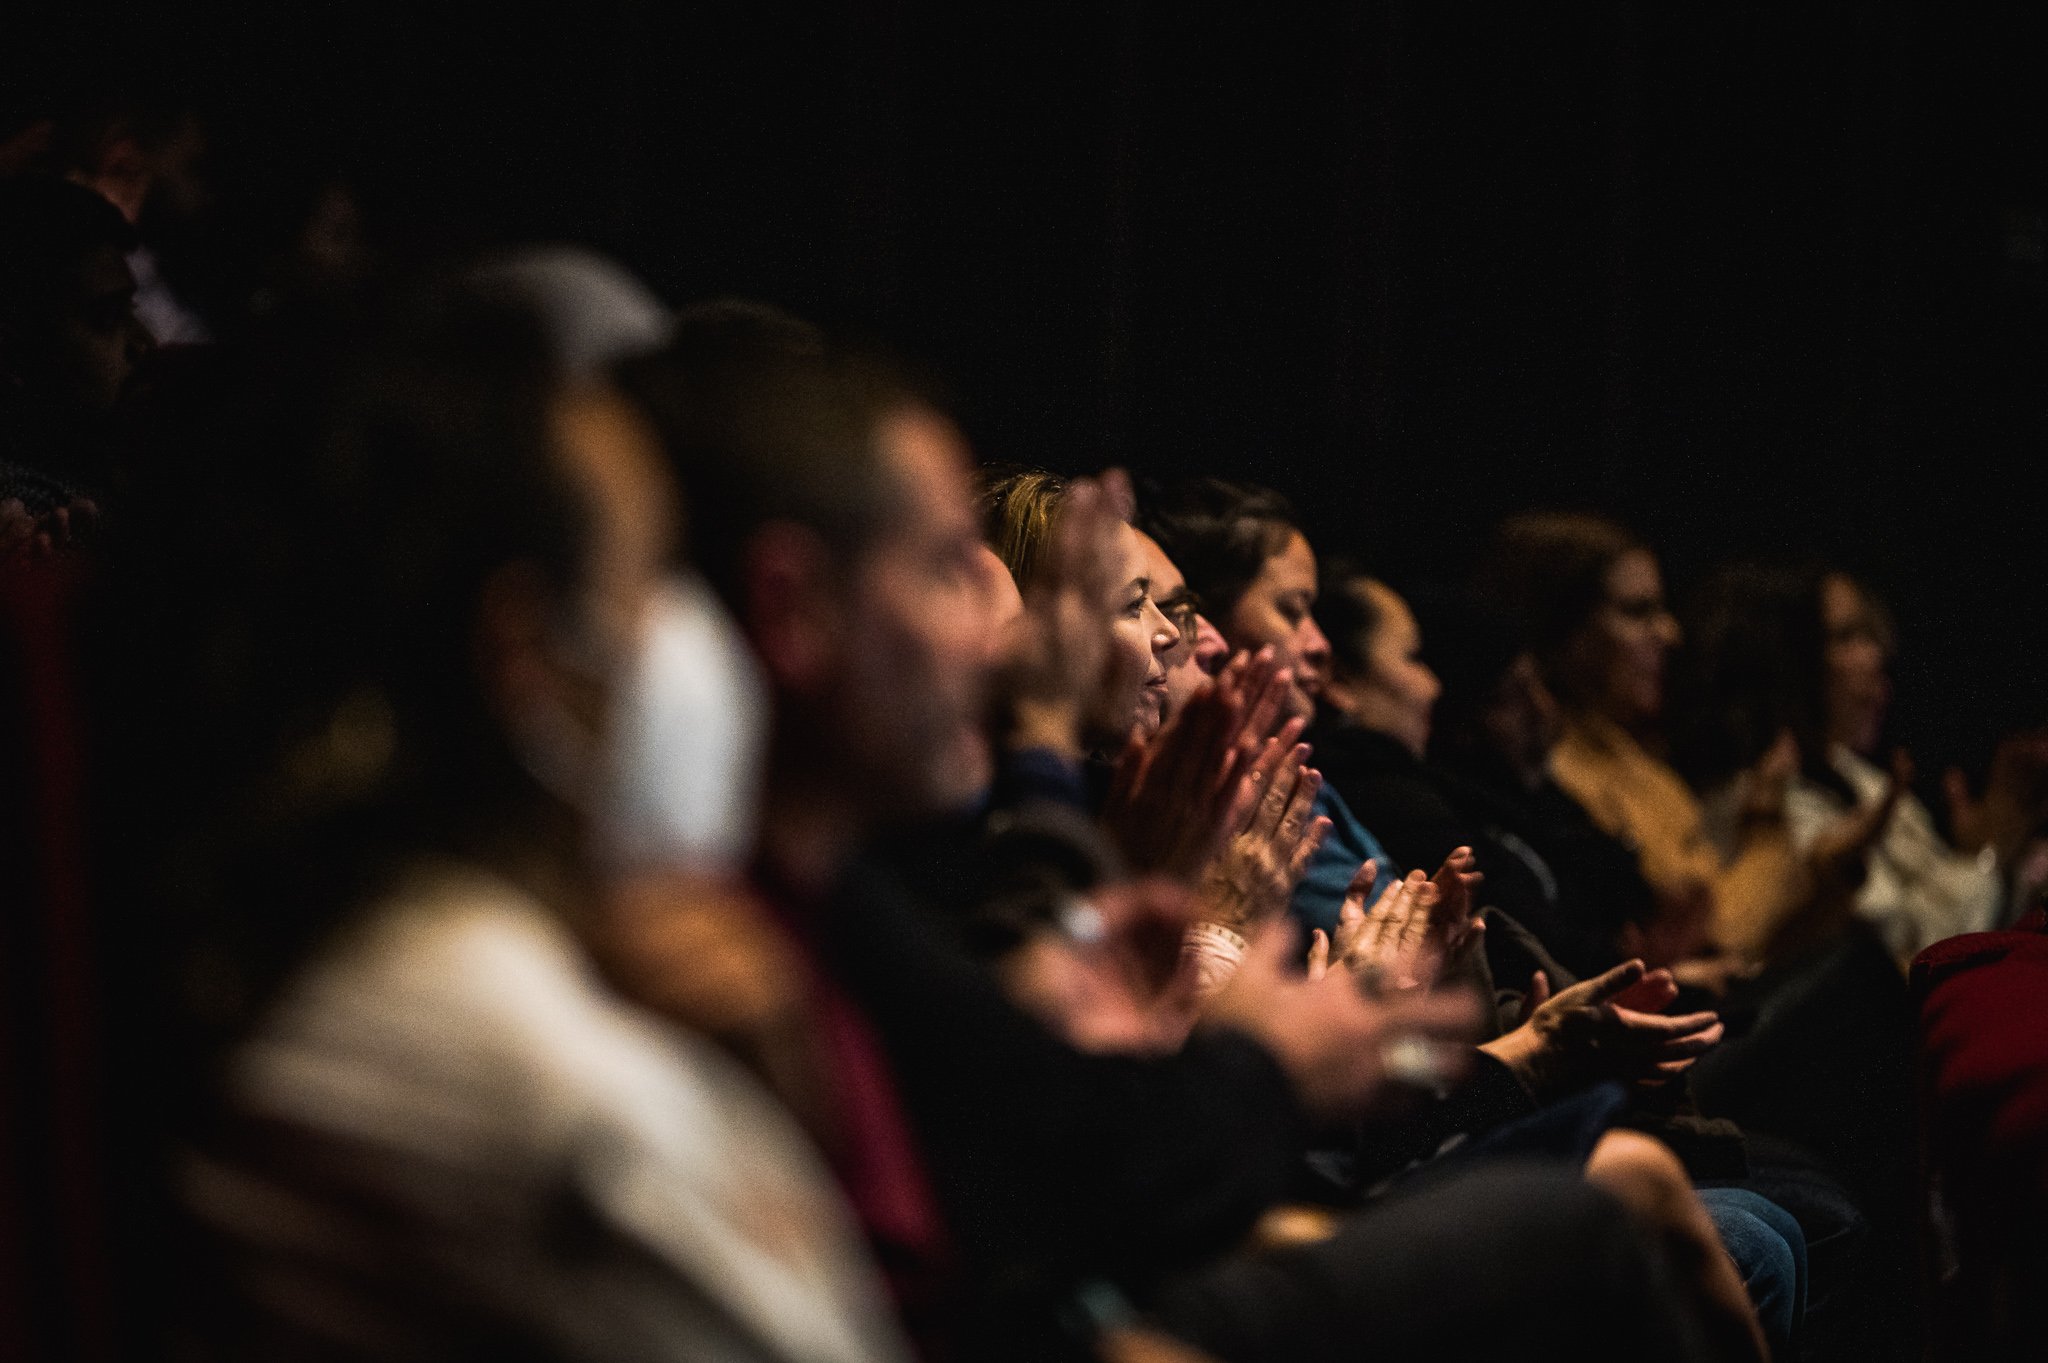 Attendees clapping at the end of the opening night film at the TIFF Bell Lightbox Theatre in Toronto. Image by David Coulson.